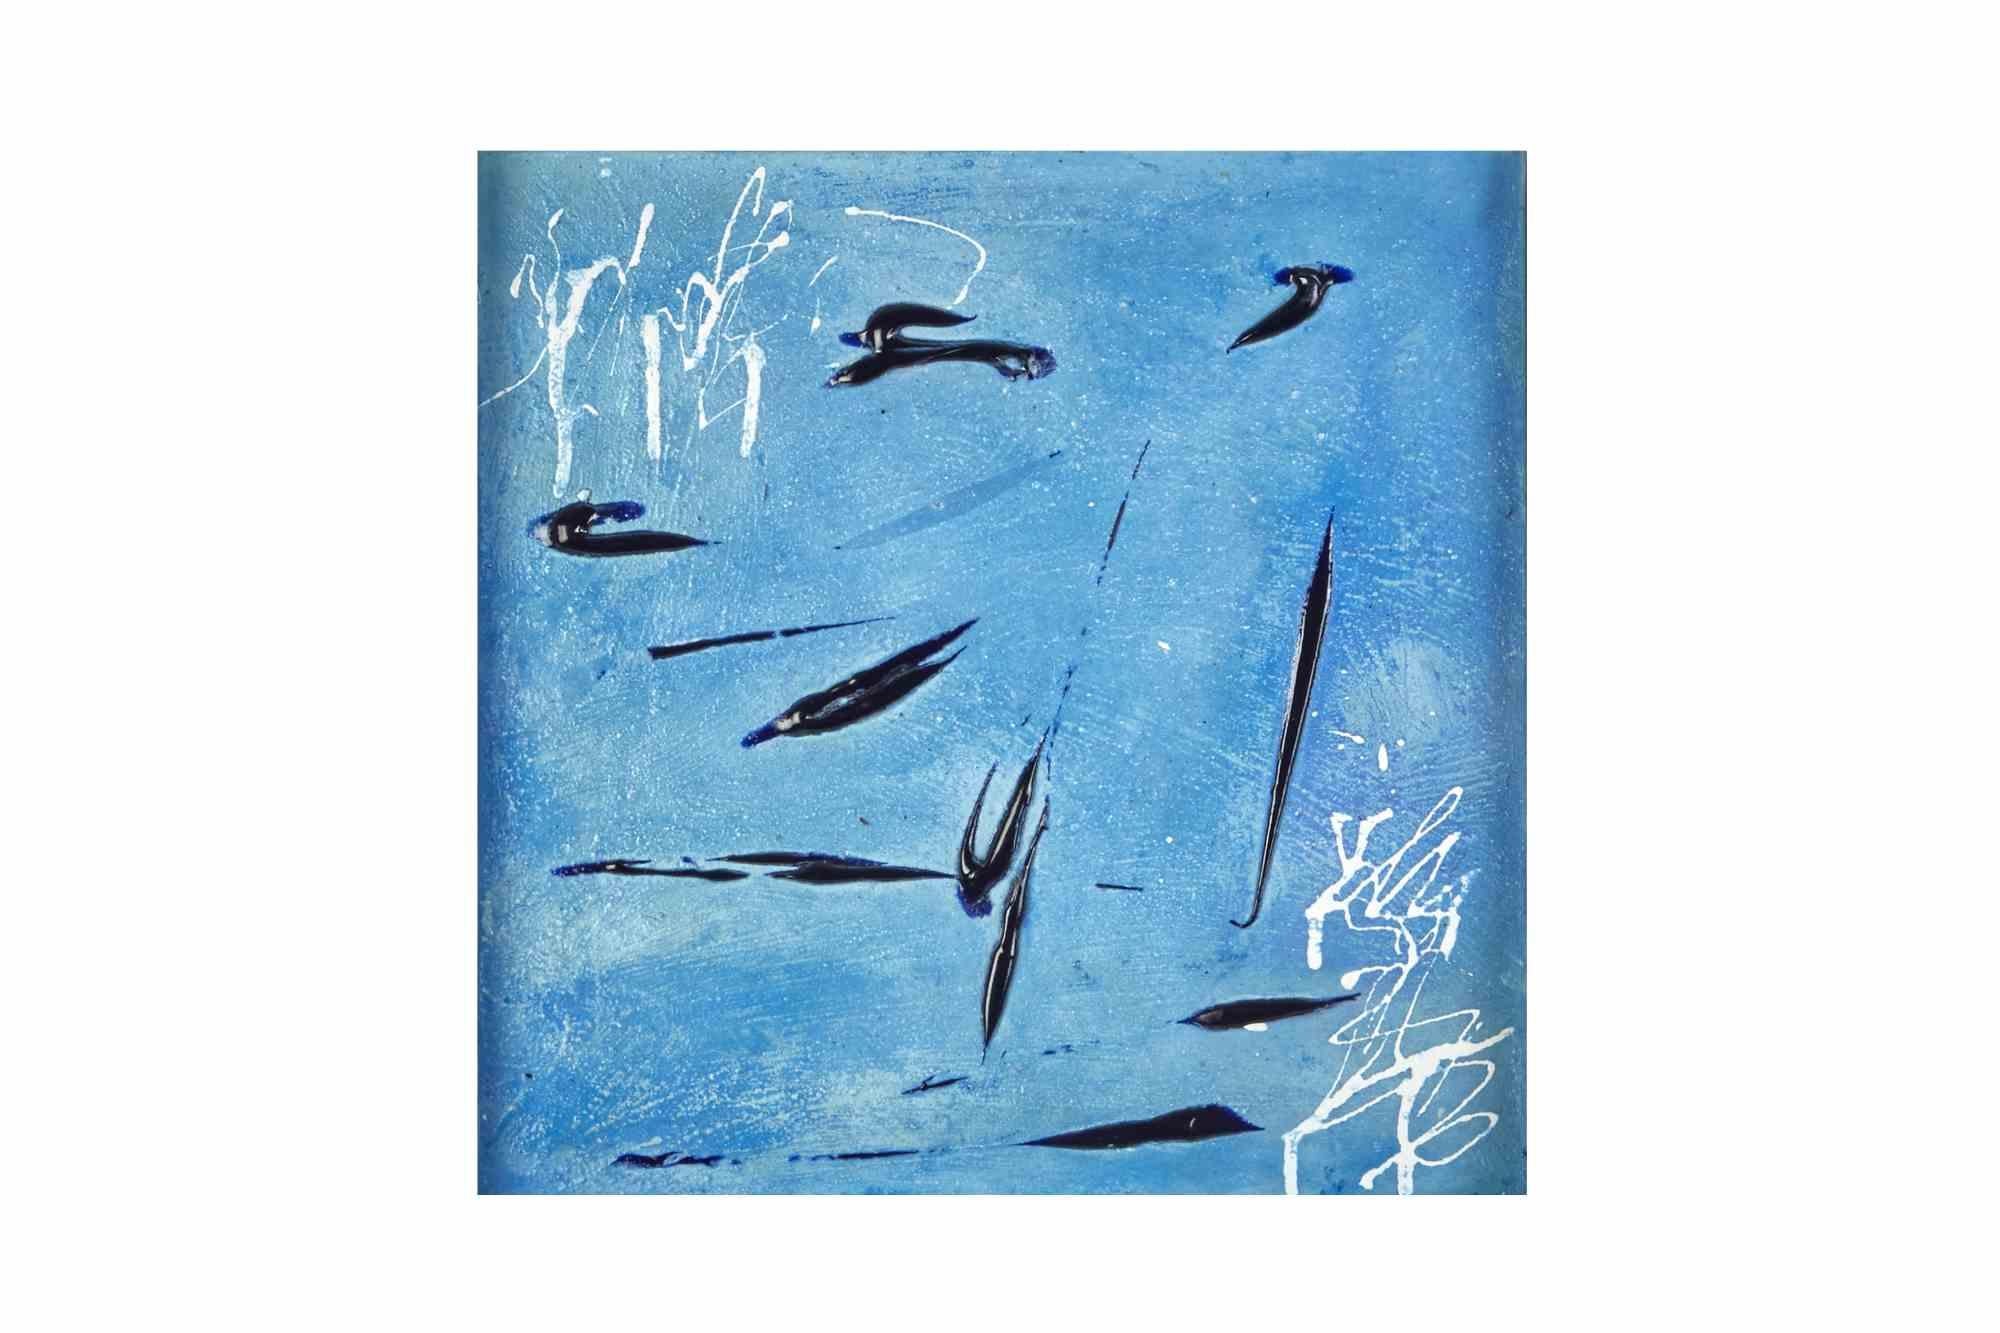 The swallows of the unconscious is a beautiful acrylic painting realized by the Italian artists Frida & Raul in 2022.

Hand-signed. Perfect conditions.